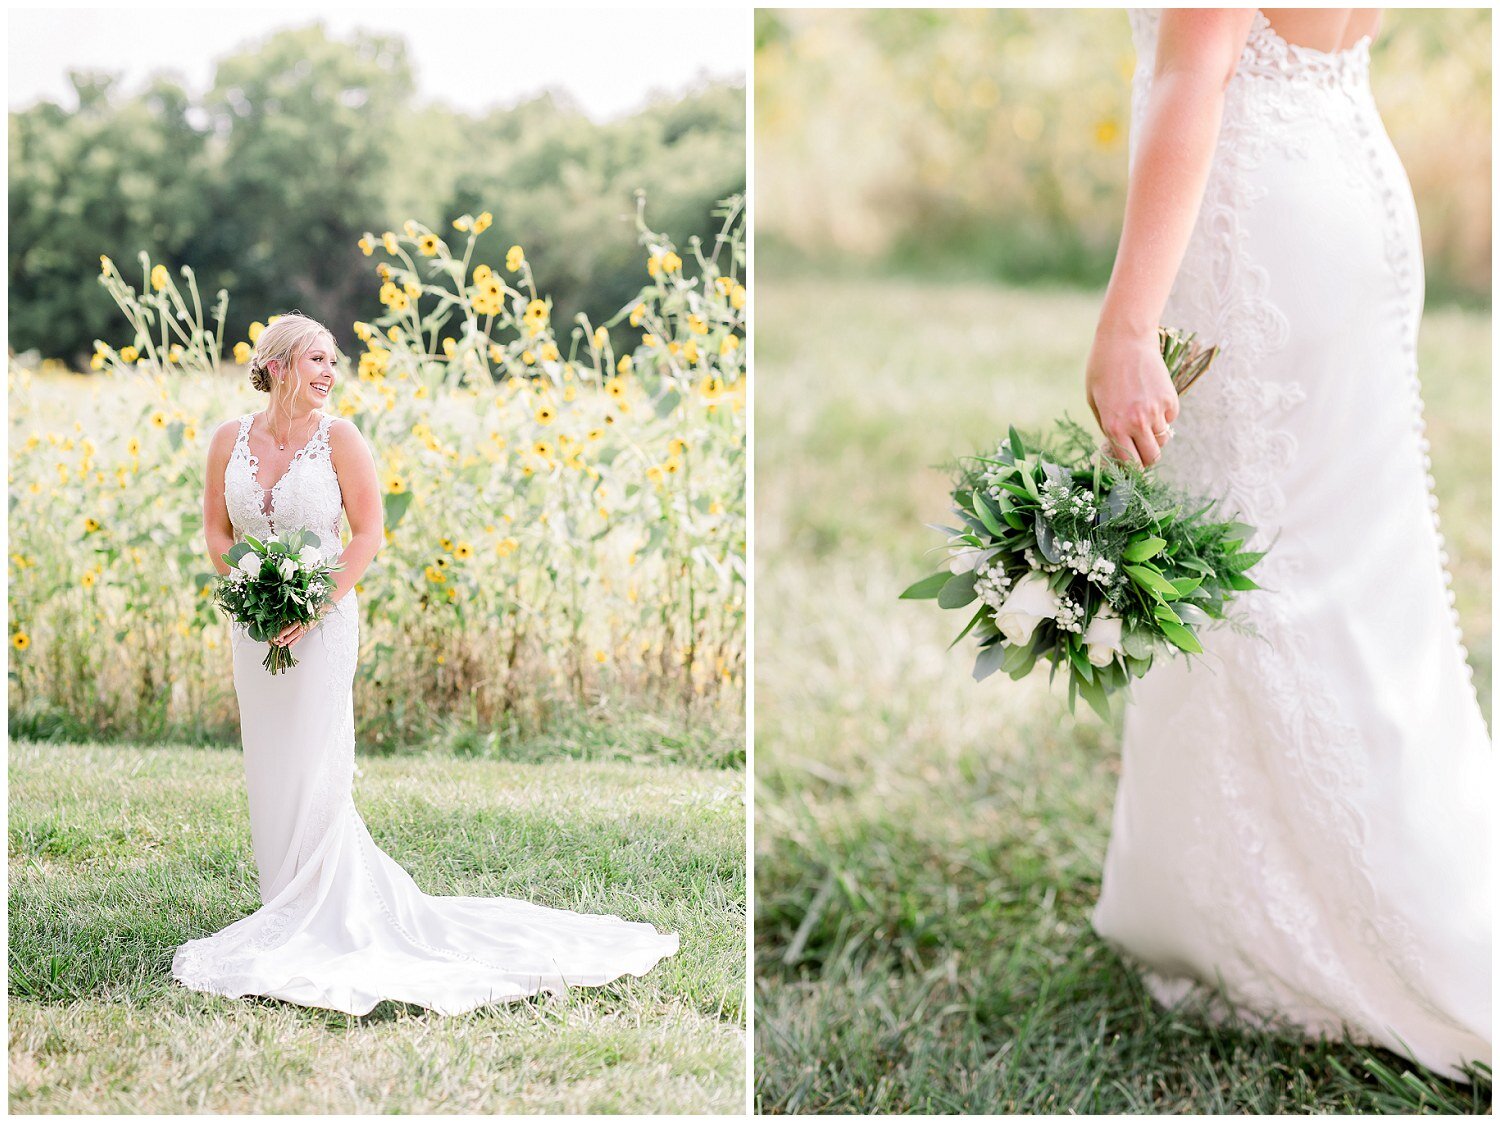 Bridal bouquet of greens and whites